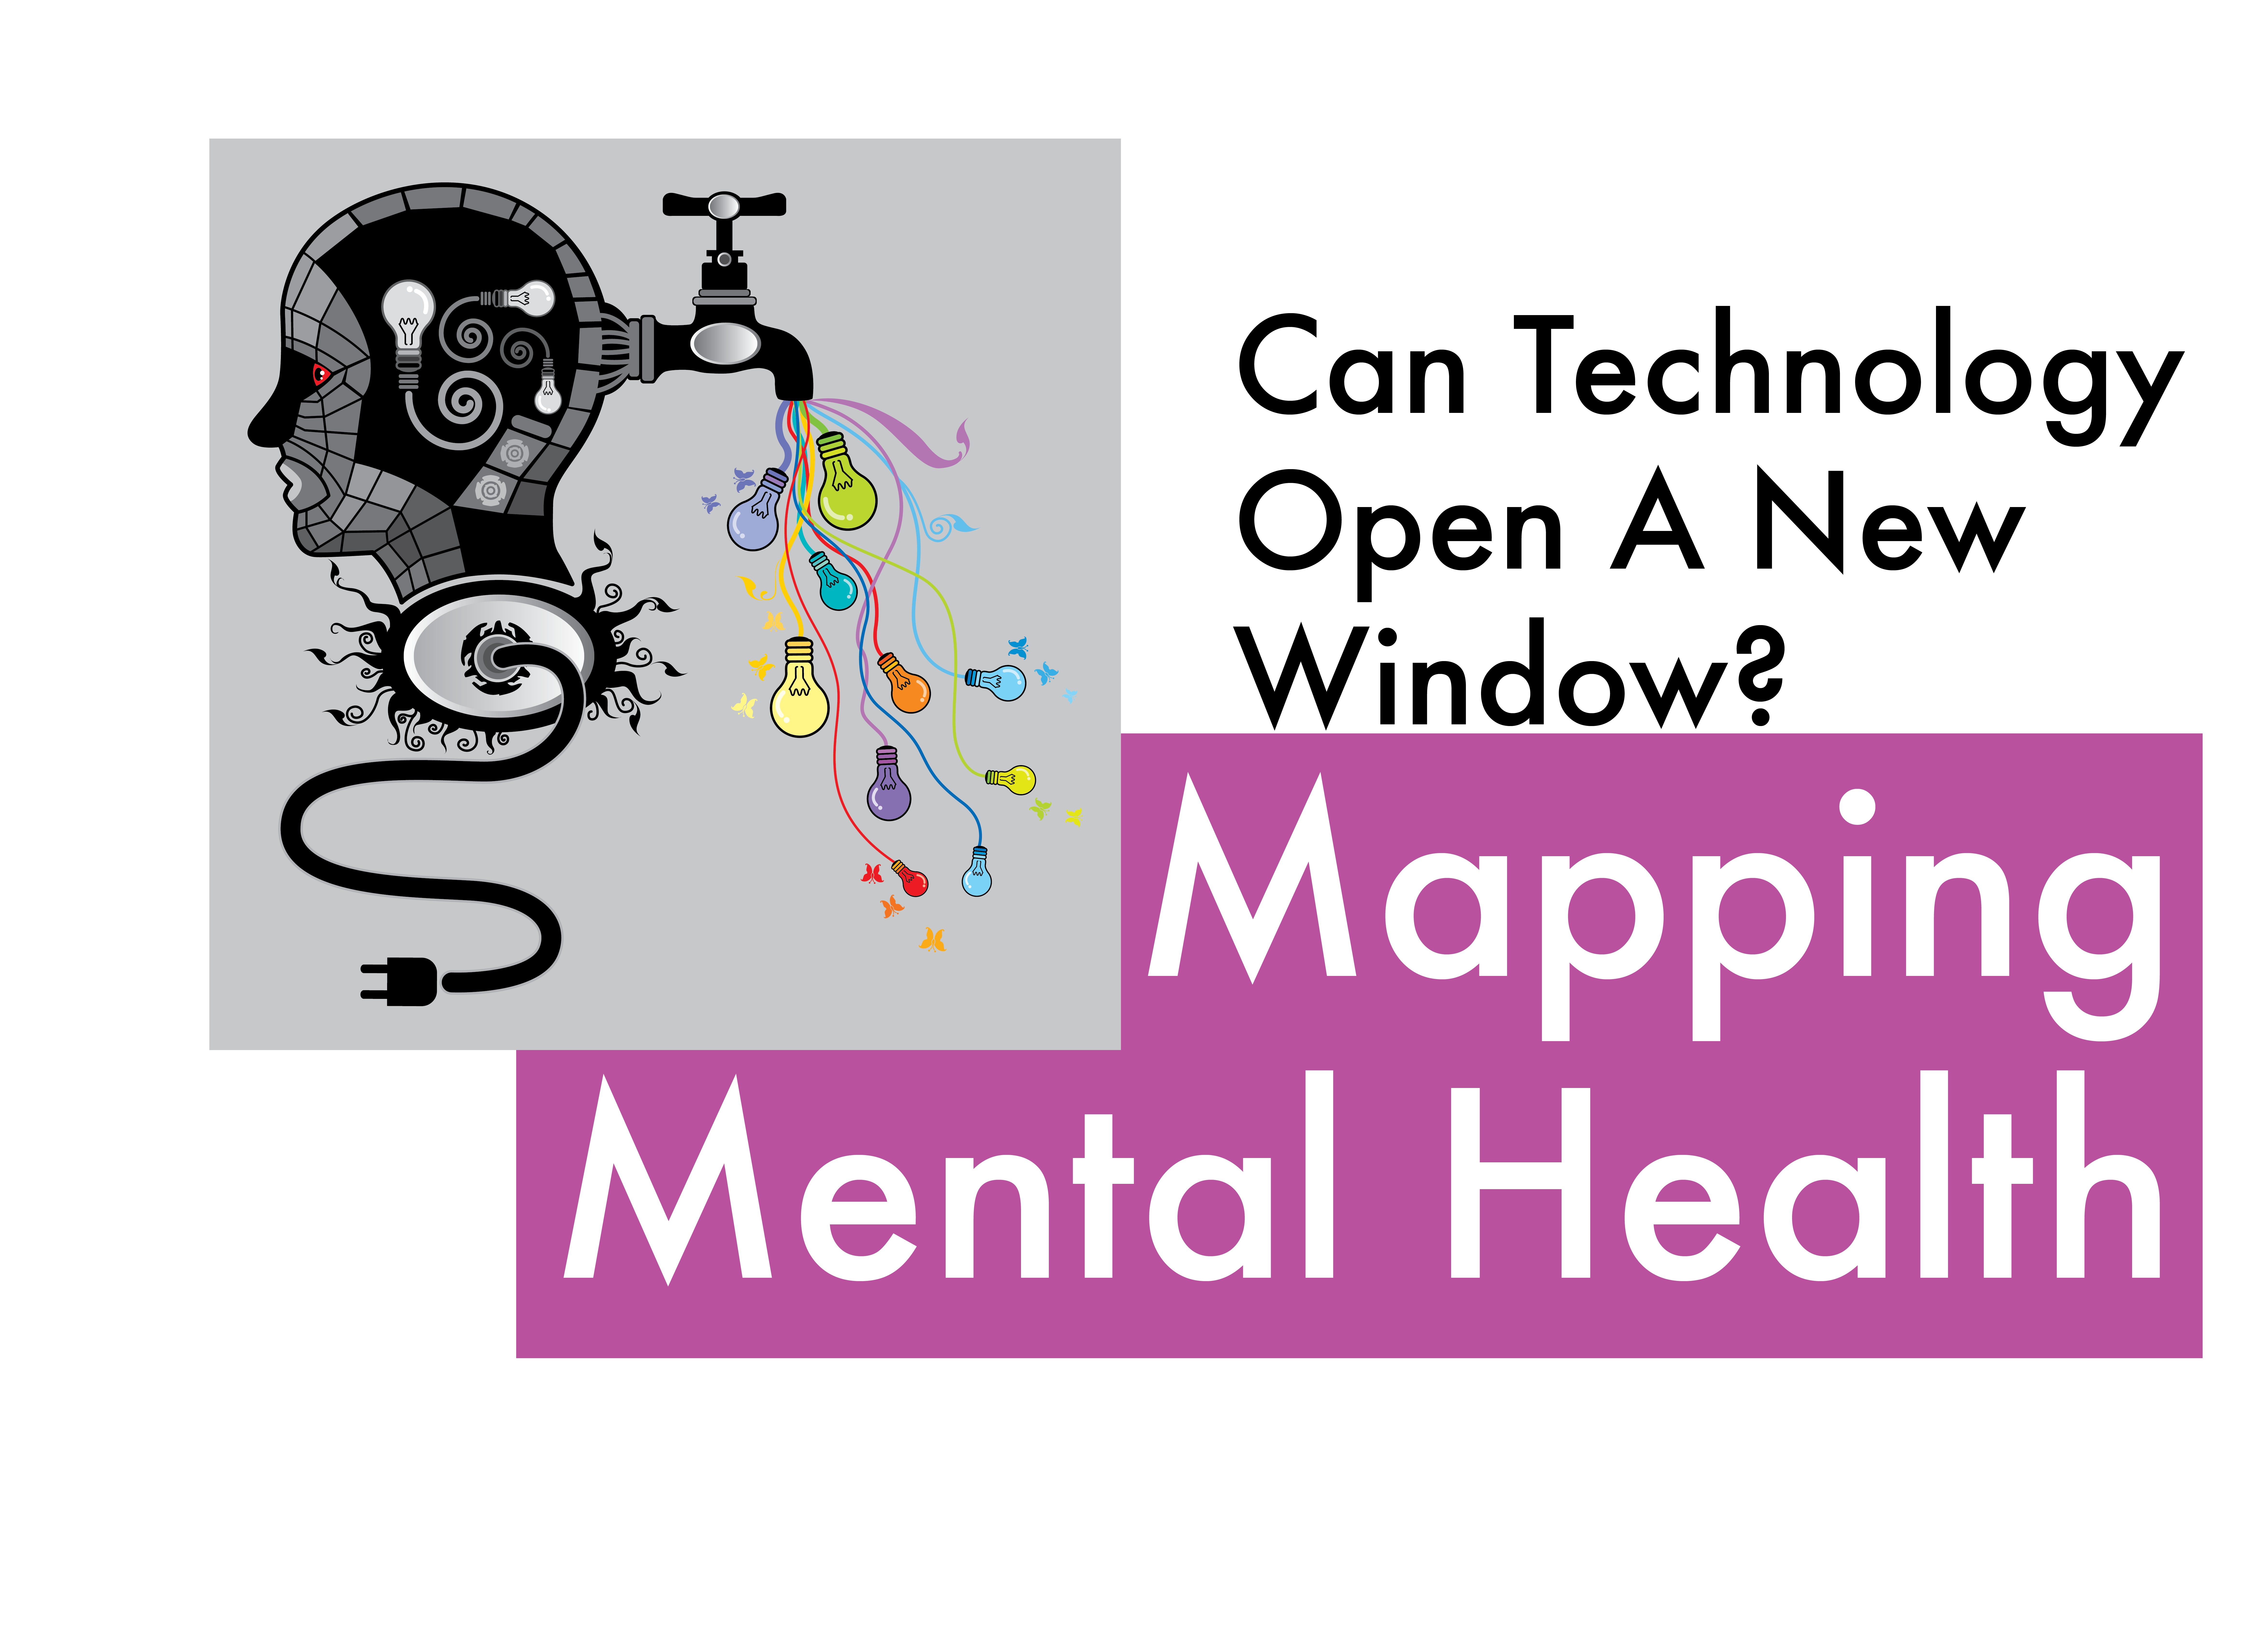 Mapping Mental Health - How Technology Could Open A Window